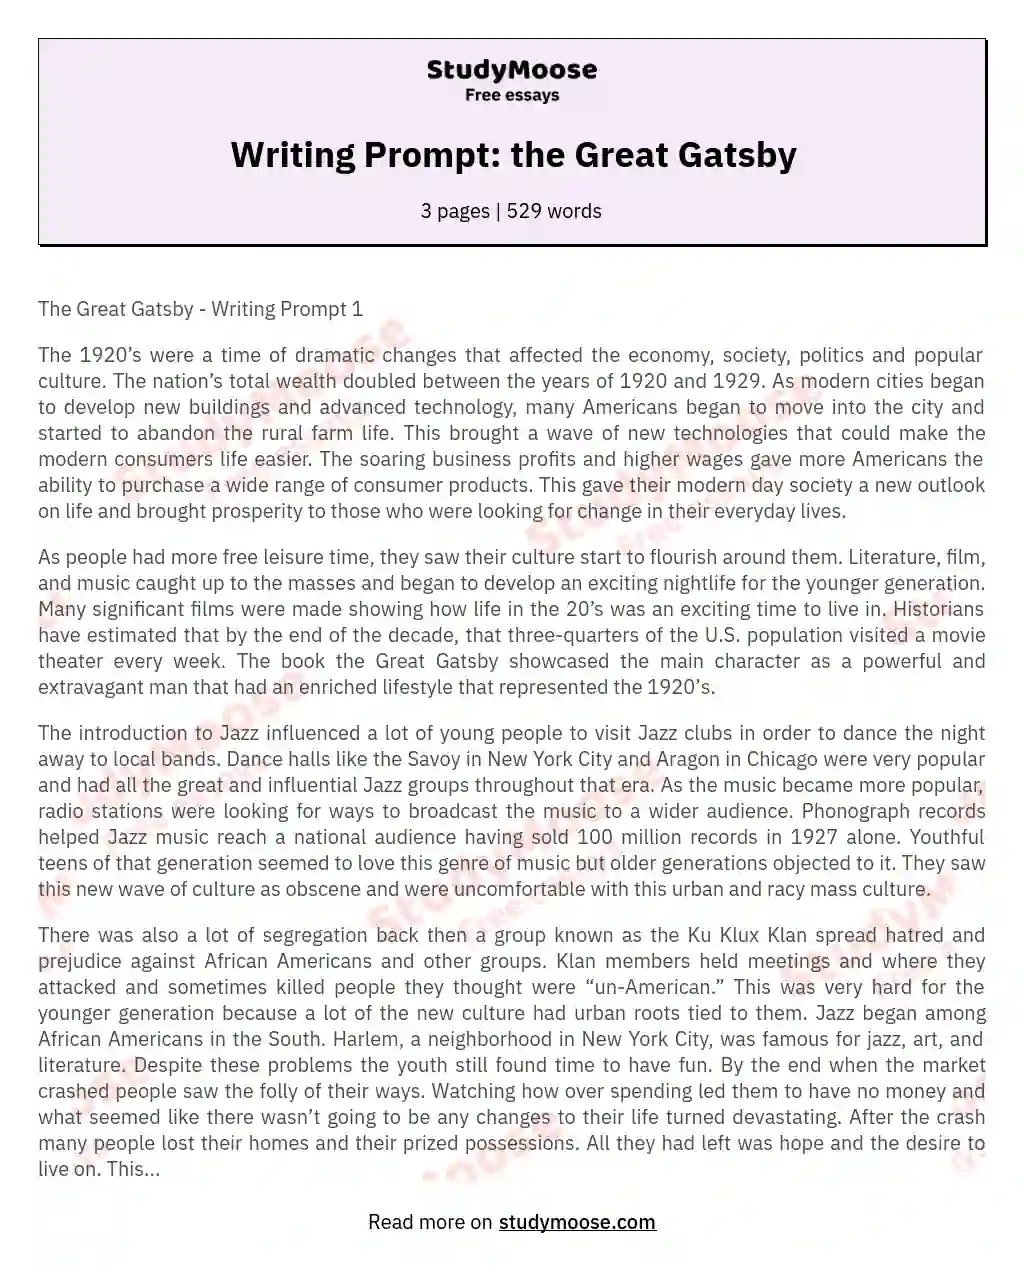 Writing Prompt: the Great Gatsby essay